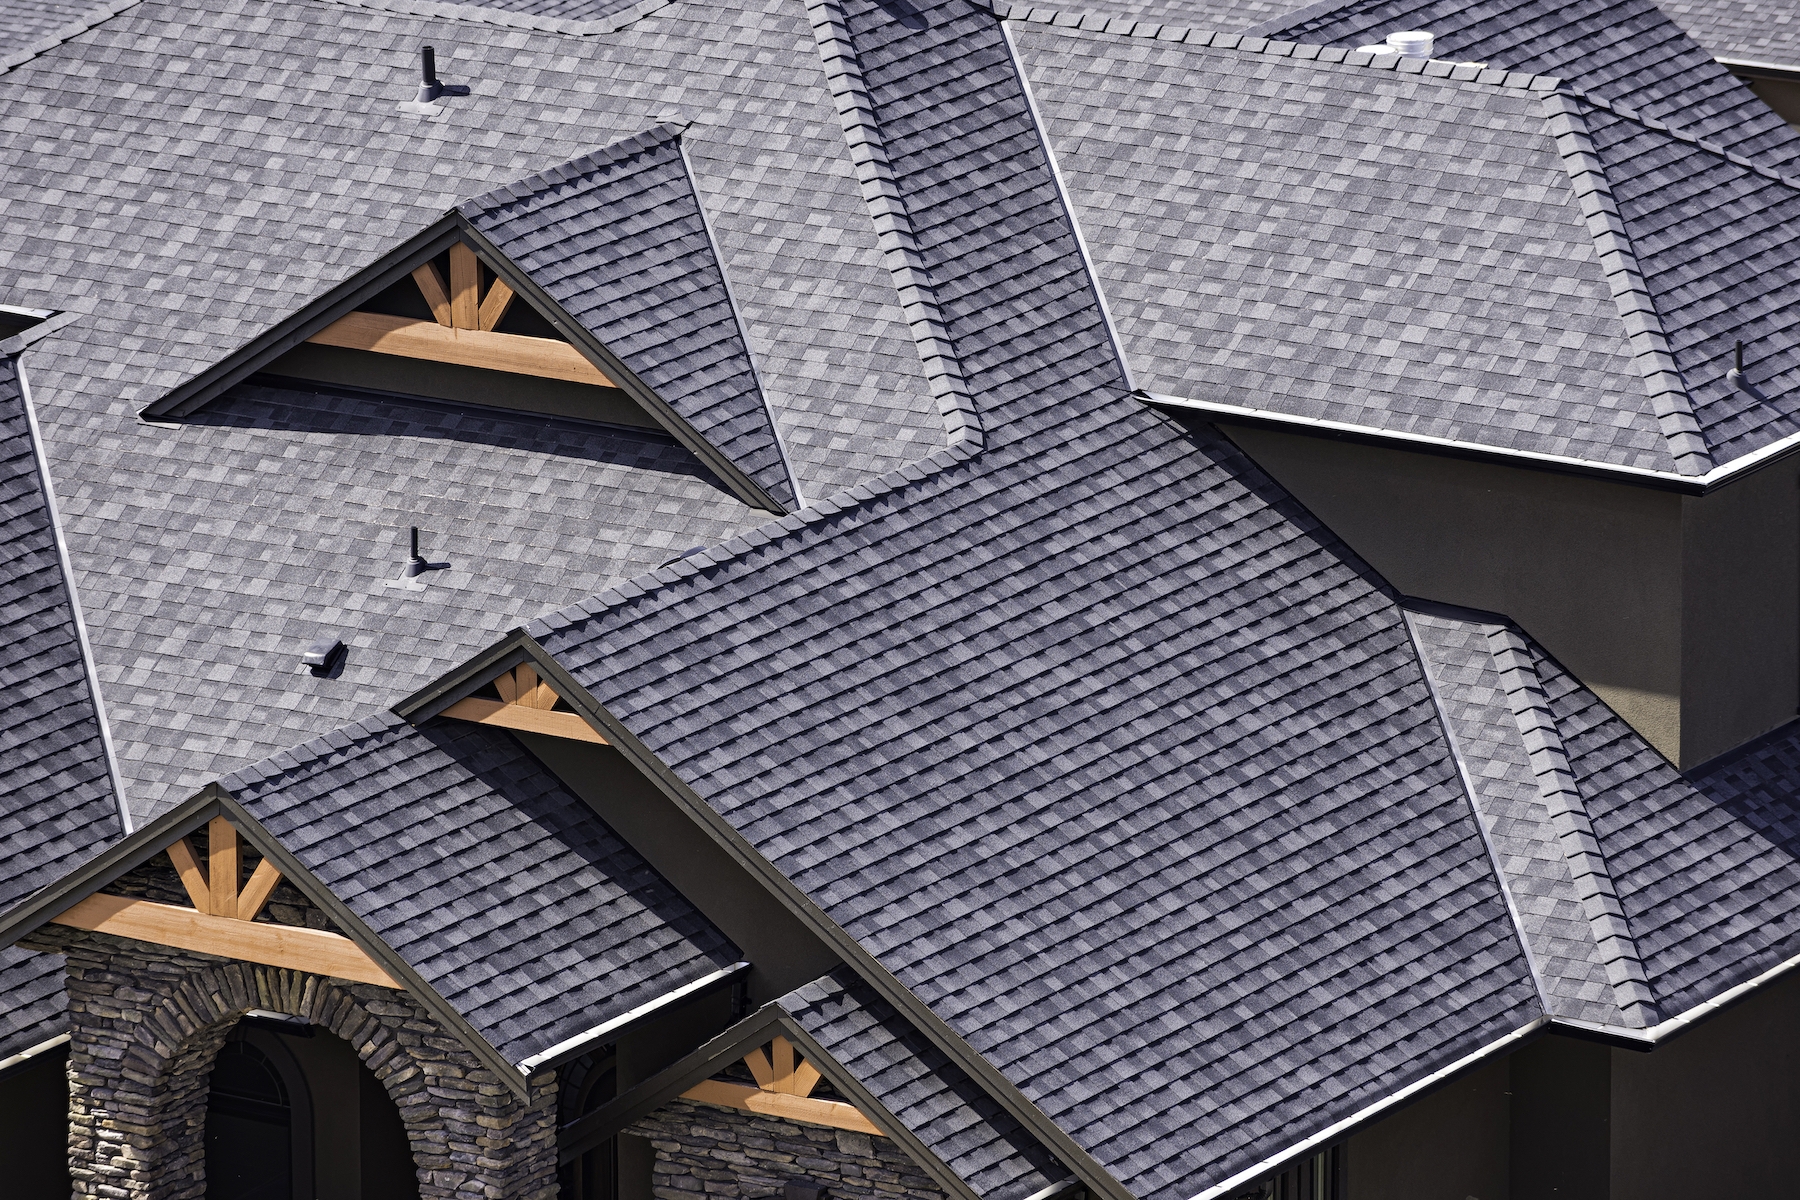 New jersey roofing professionals providing top notch roof installtation services